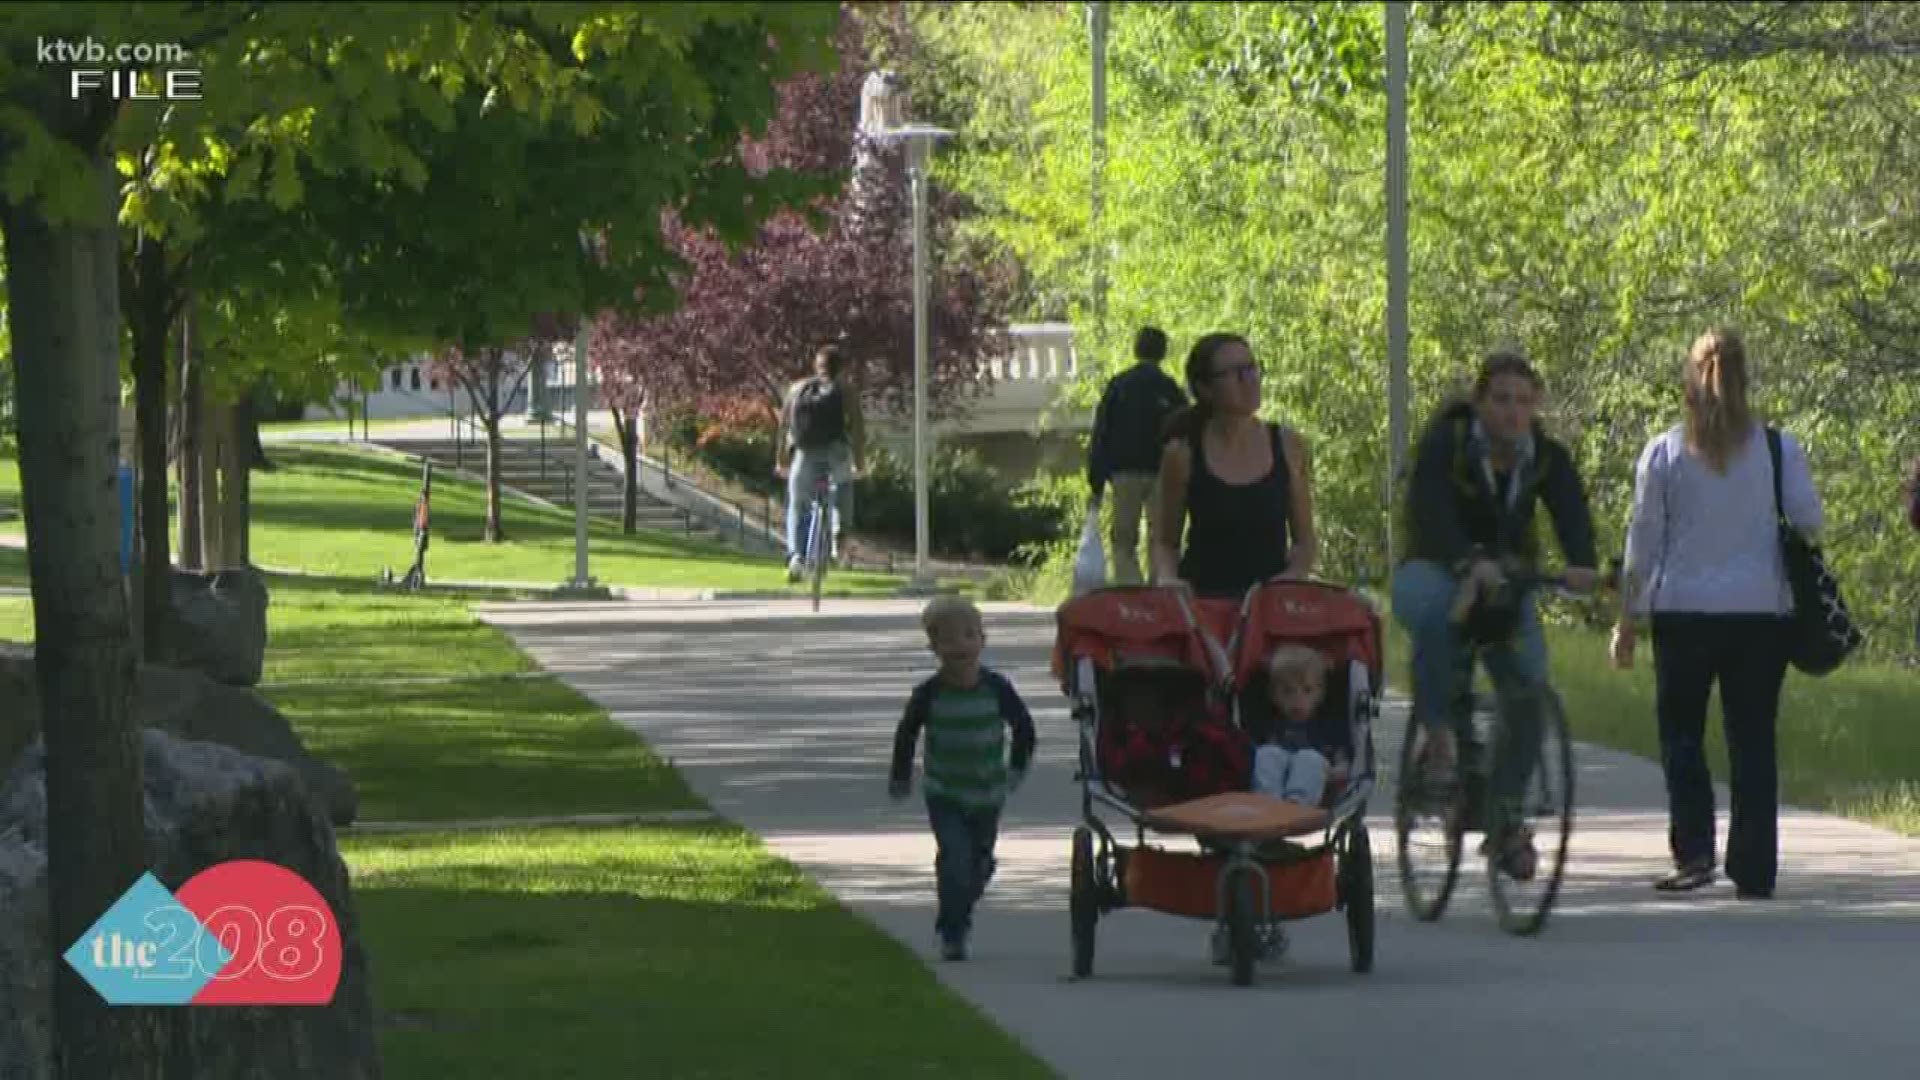 For the answer to this viewer question, KTVB went to Boise Parks and Recreation Department.